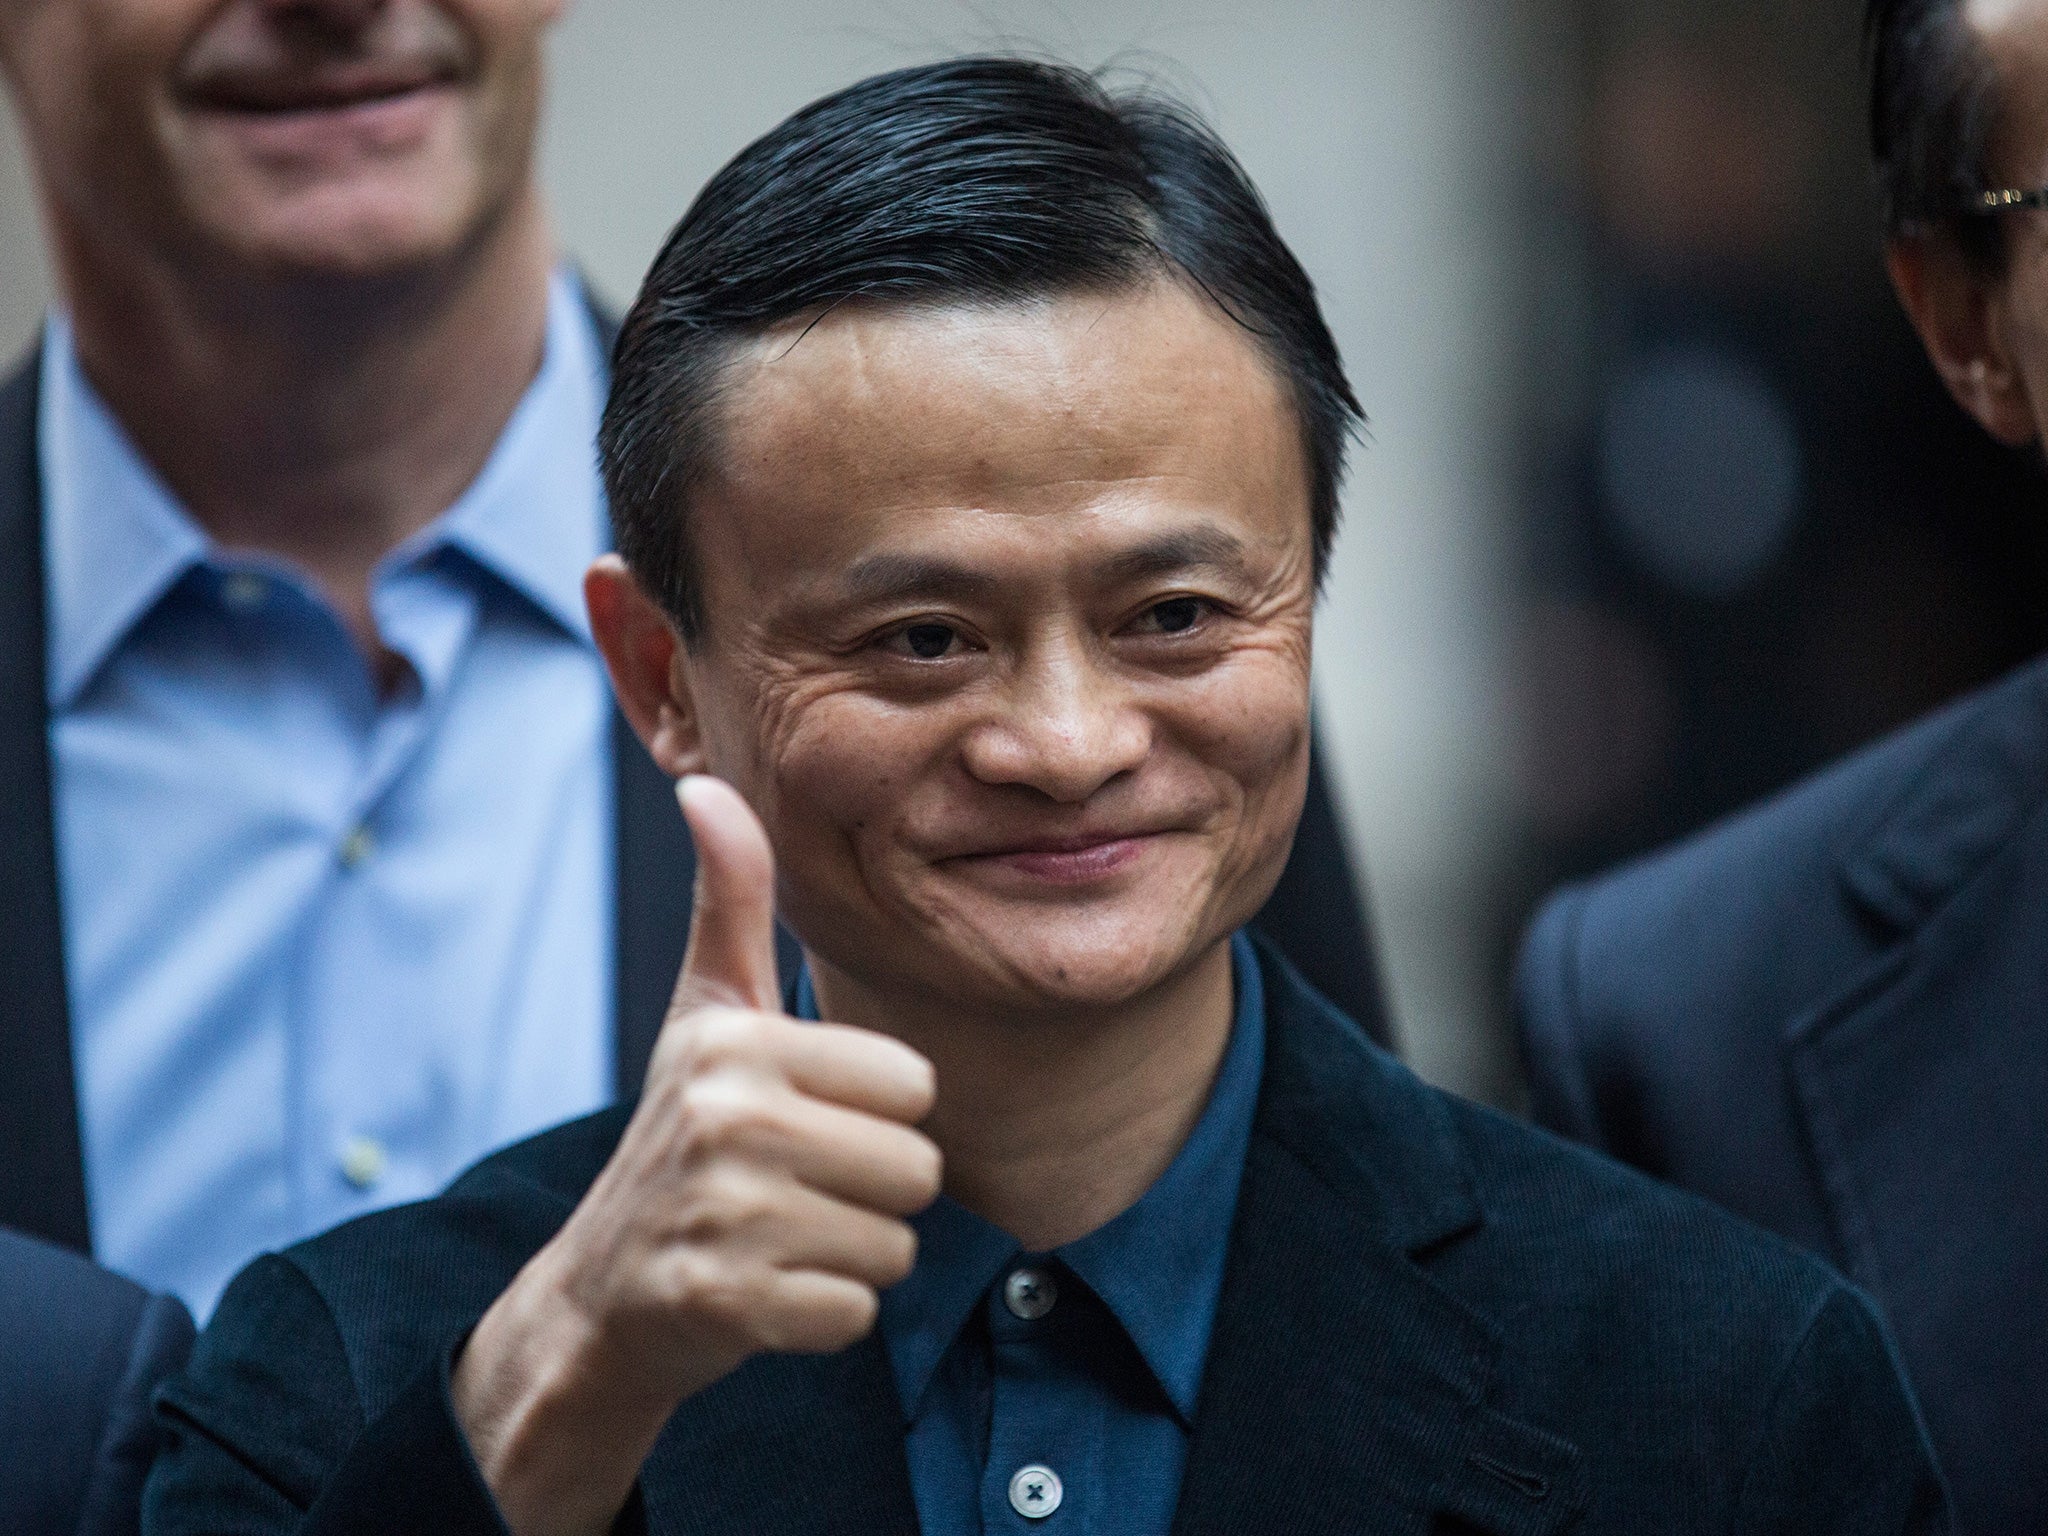 Jack Ma met US President Donald Trump last month and announced his company would help create one million jobs in the US